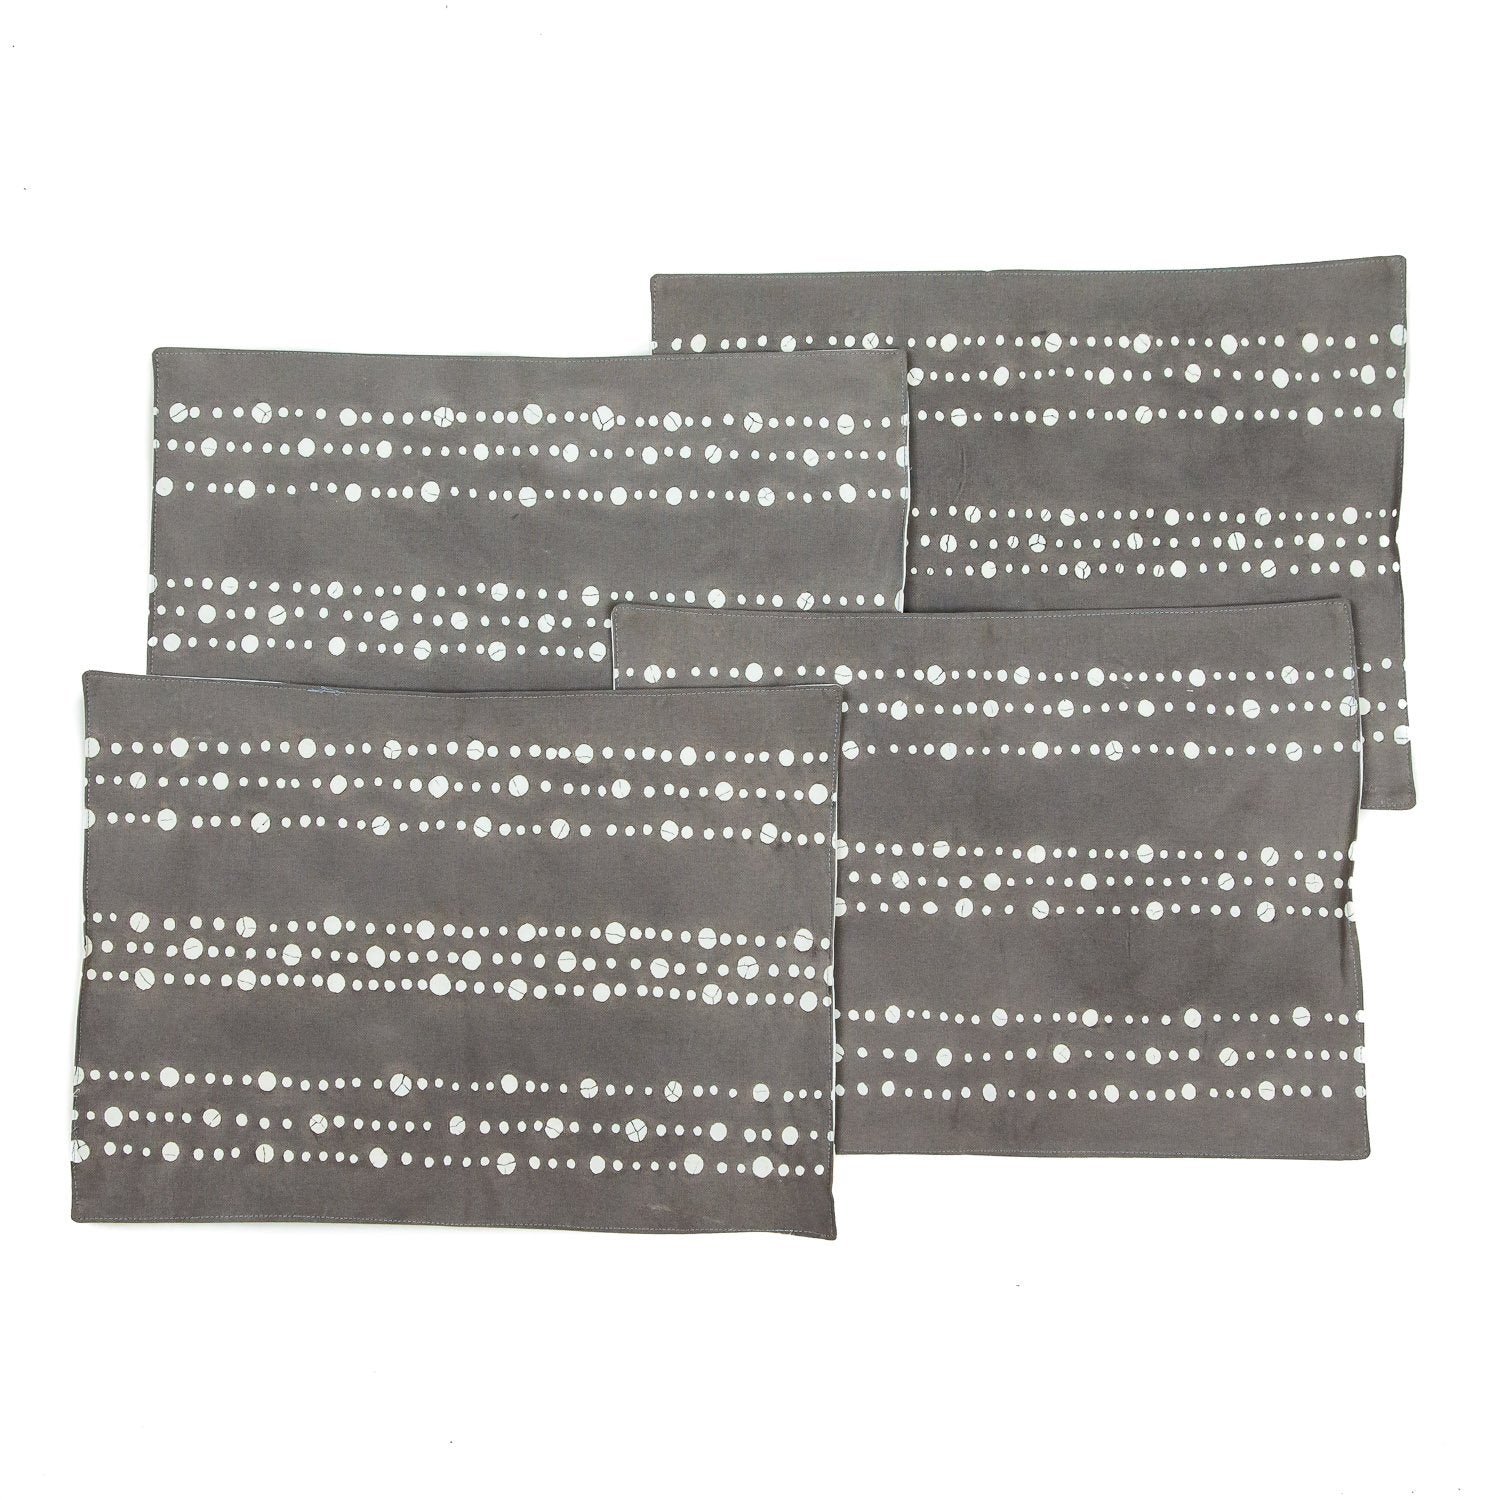 Handmade African placemats with dots in grey colours